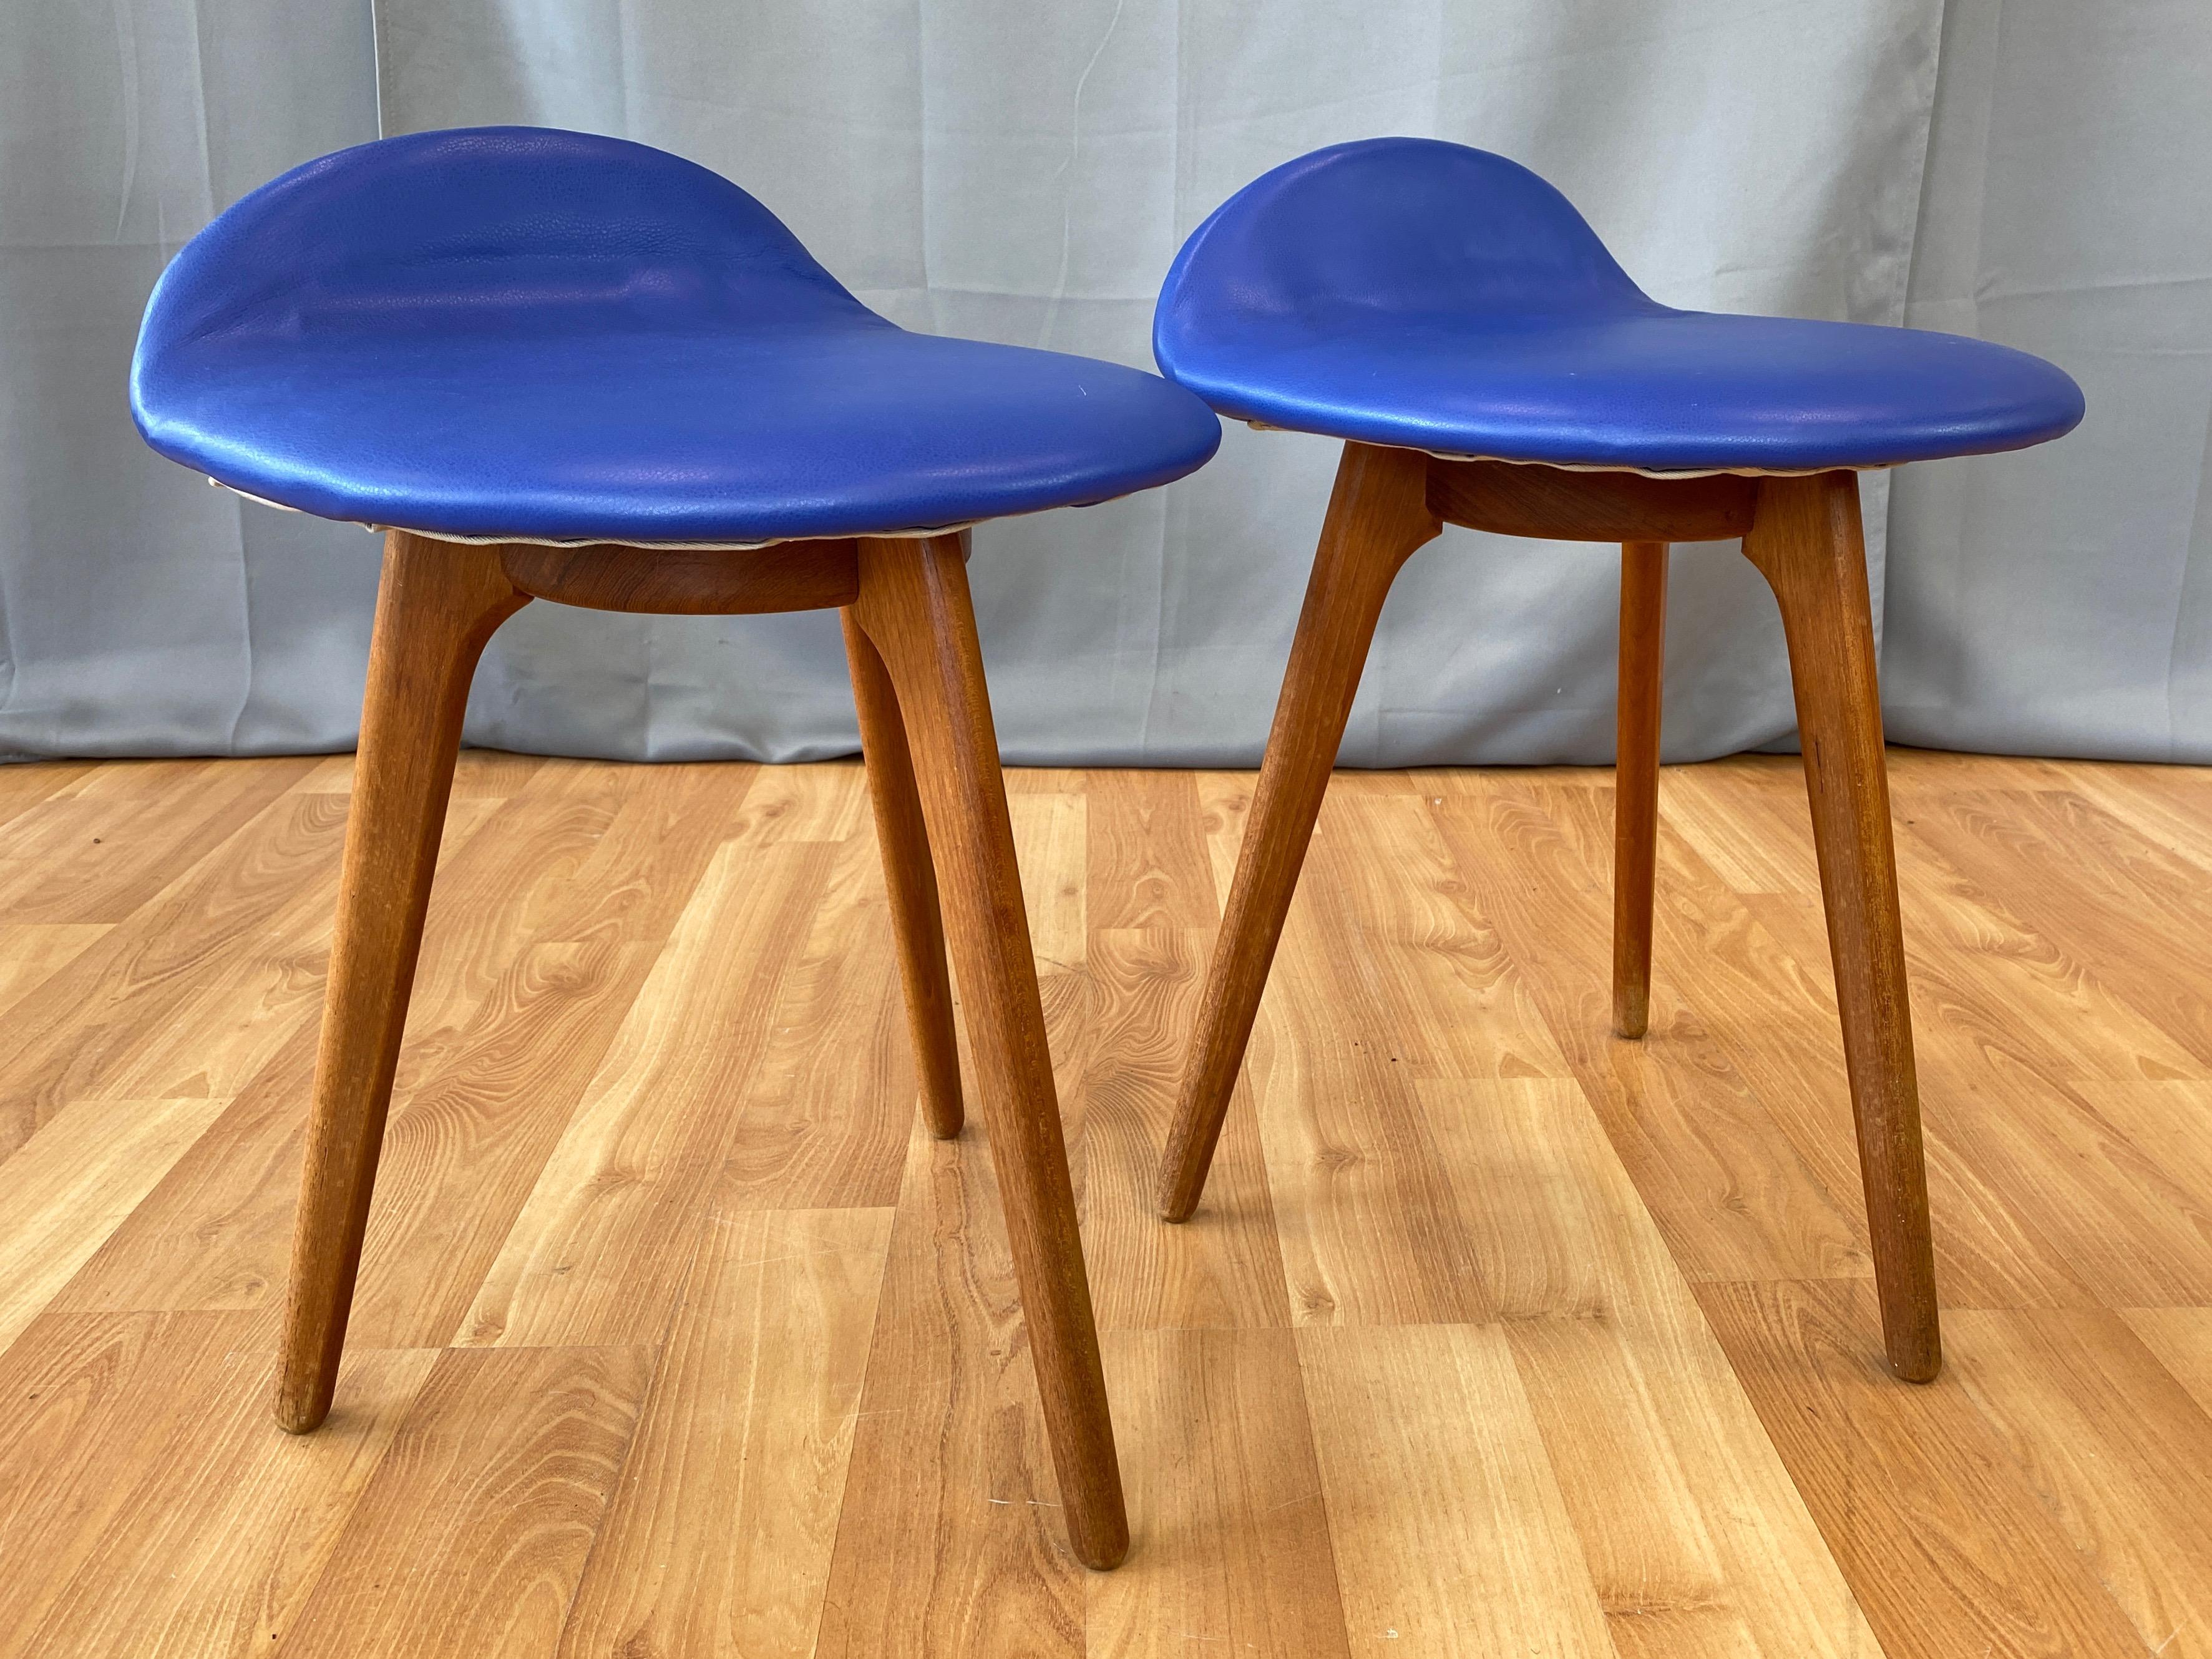 A 1960s pair of rare lounge or cocktail table height model OD-61 teak stools with blue leather upholstery by Erik Buch for Oddense Maskinsnedkeri.

Iconic Danish modern design with clean lines in smoothly crafted solid teak. Distinguished by an